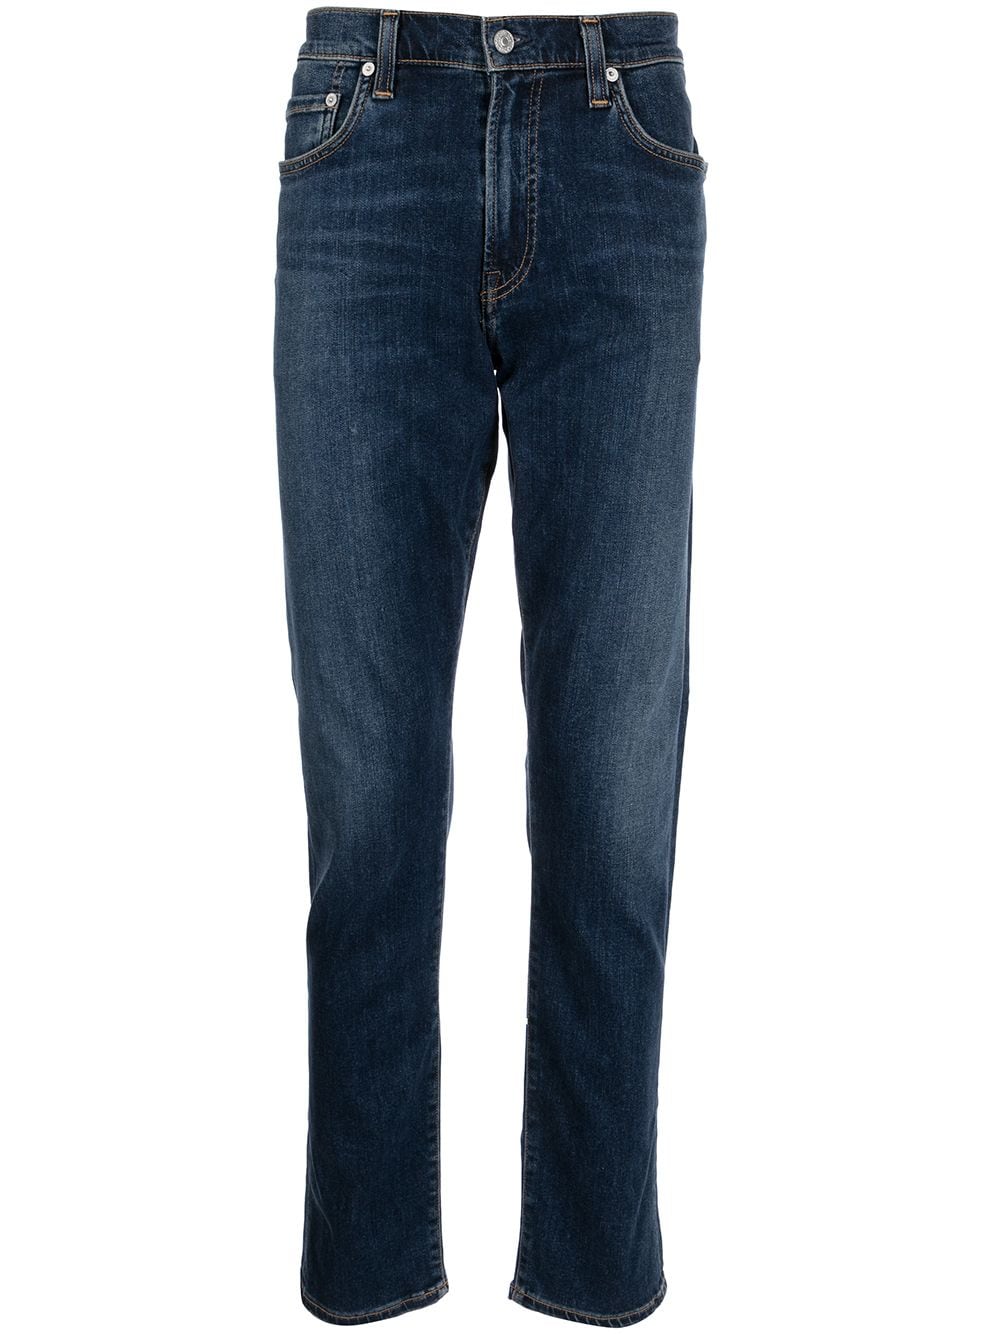 Citizens of Humanity London slim-fit jeans - Blue von Citizens of Humanity